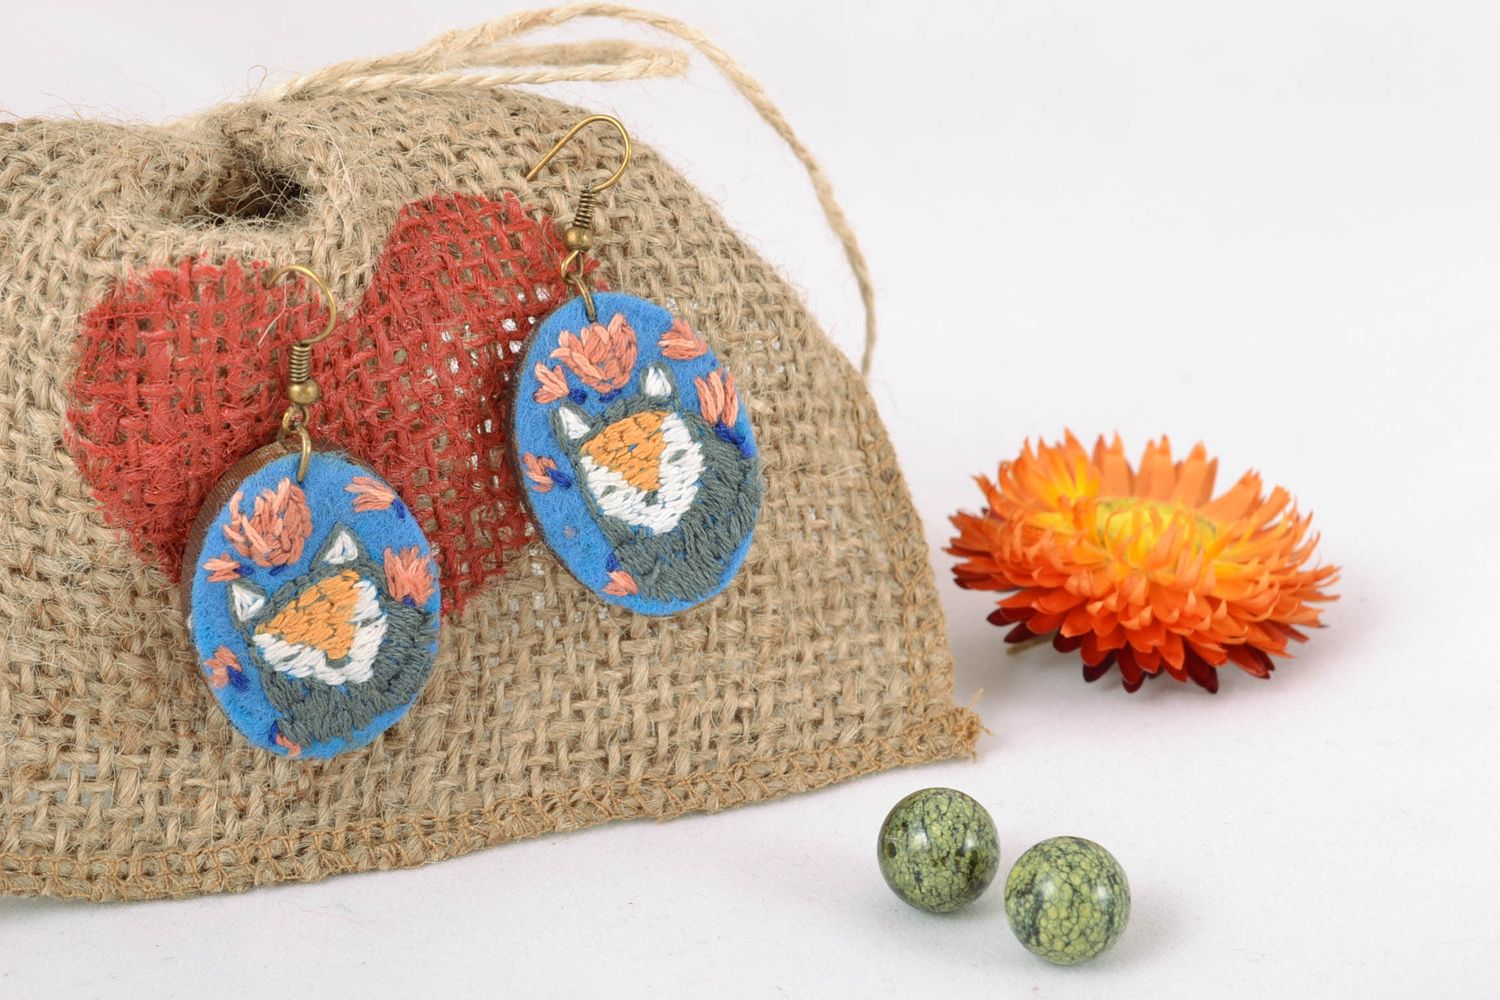 Handmade wooden and felt earrings with satin stitch embroidery photo 1